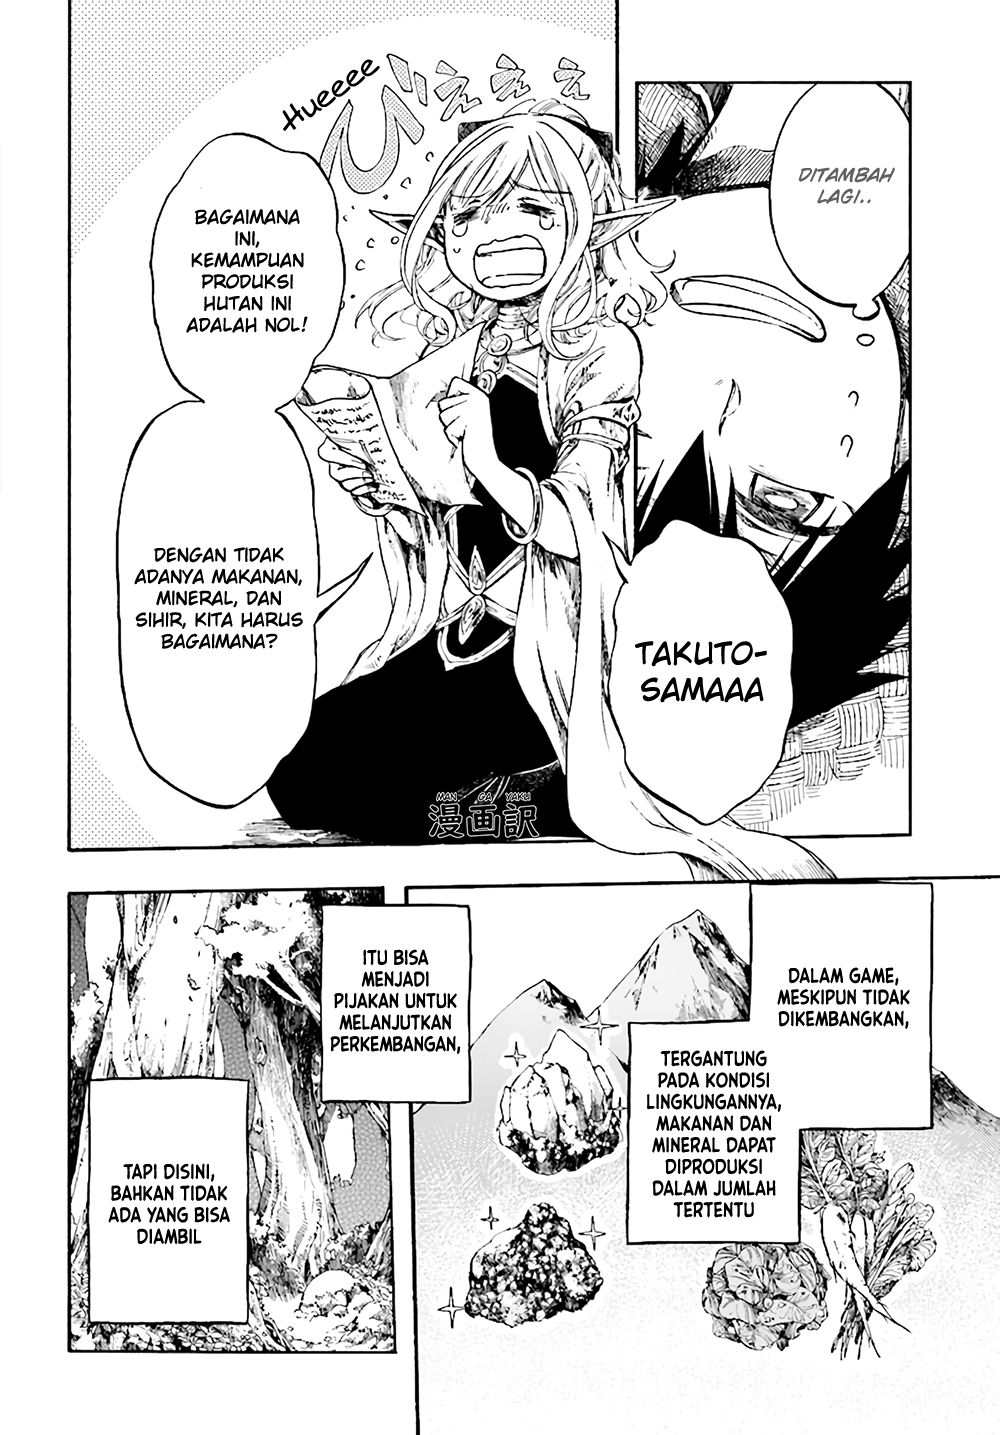 Baca Isekai Apocalypse MYNOGHRA ~The conquest of the world starts with the civilization of ruin~ Chapter 4.1  - GudangKomik